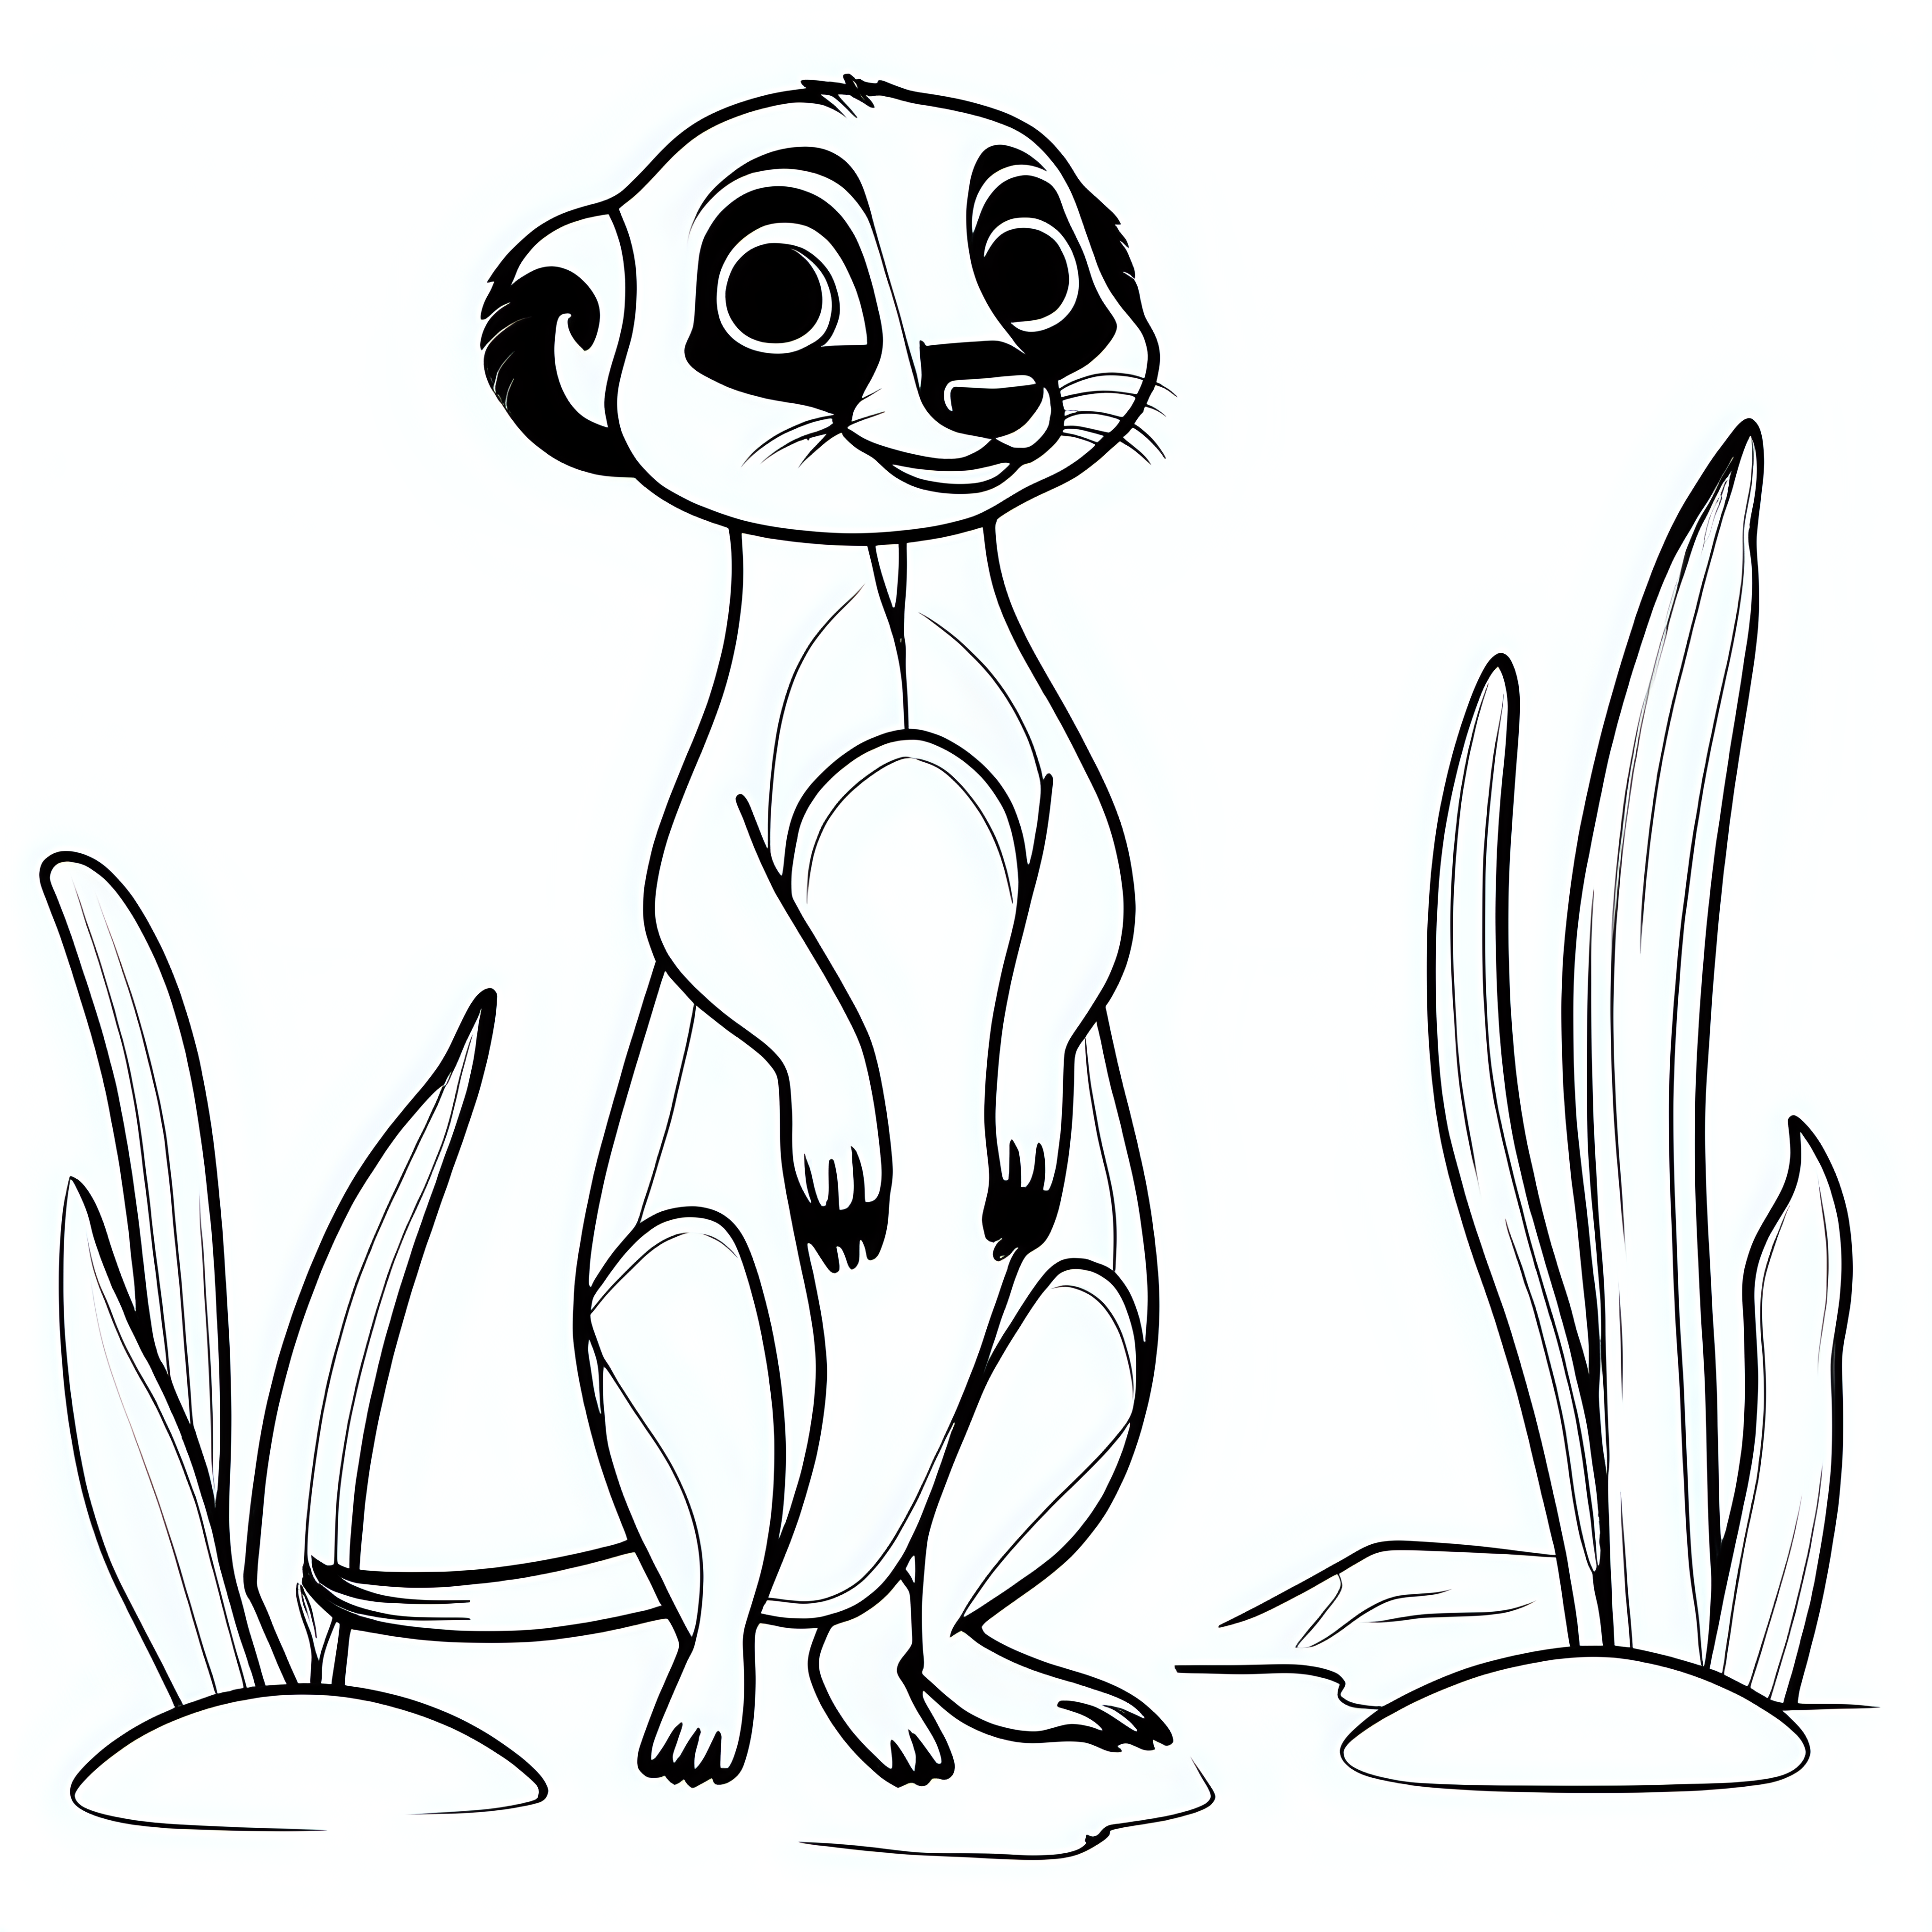 draw a cute Meerkat animal with only the